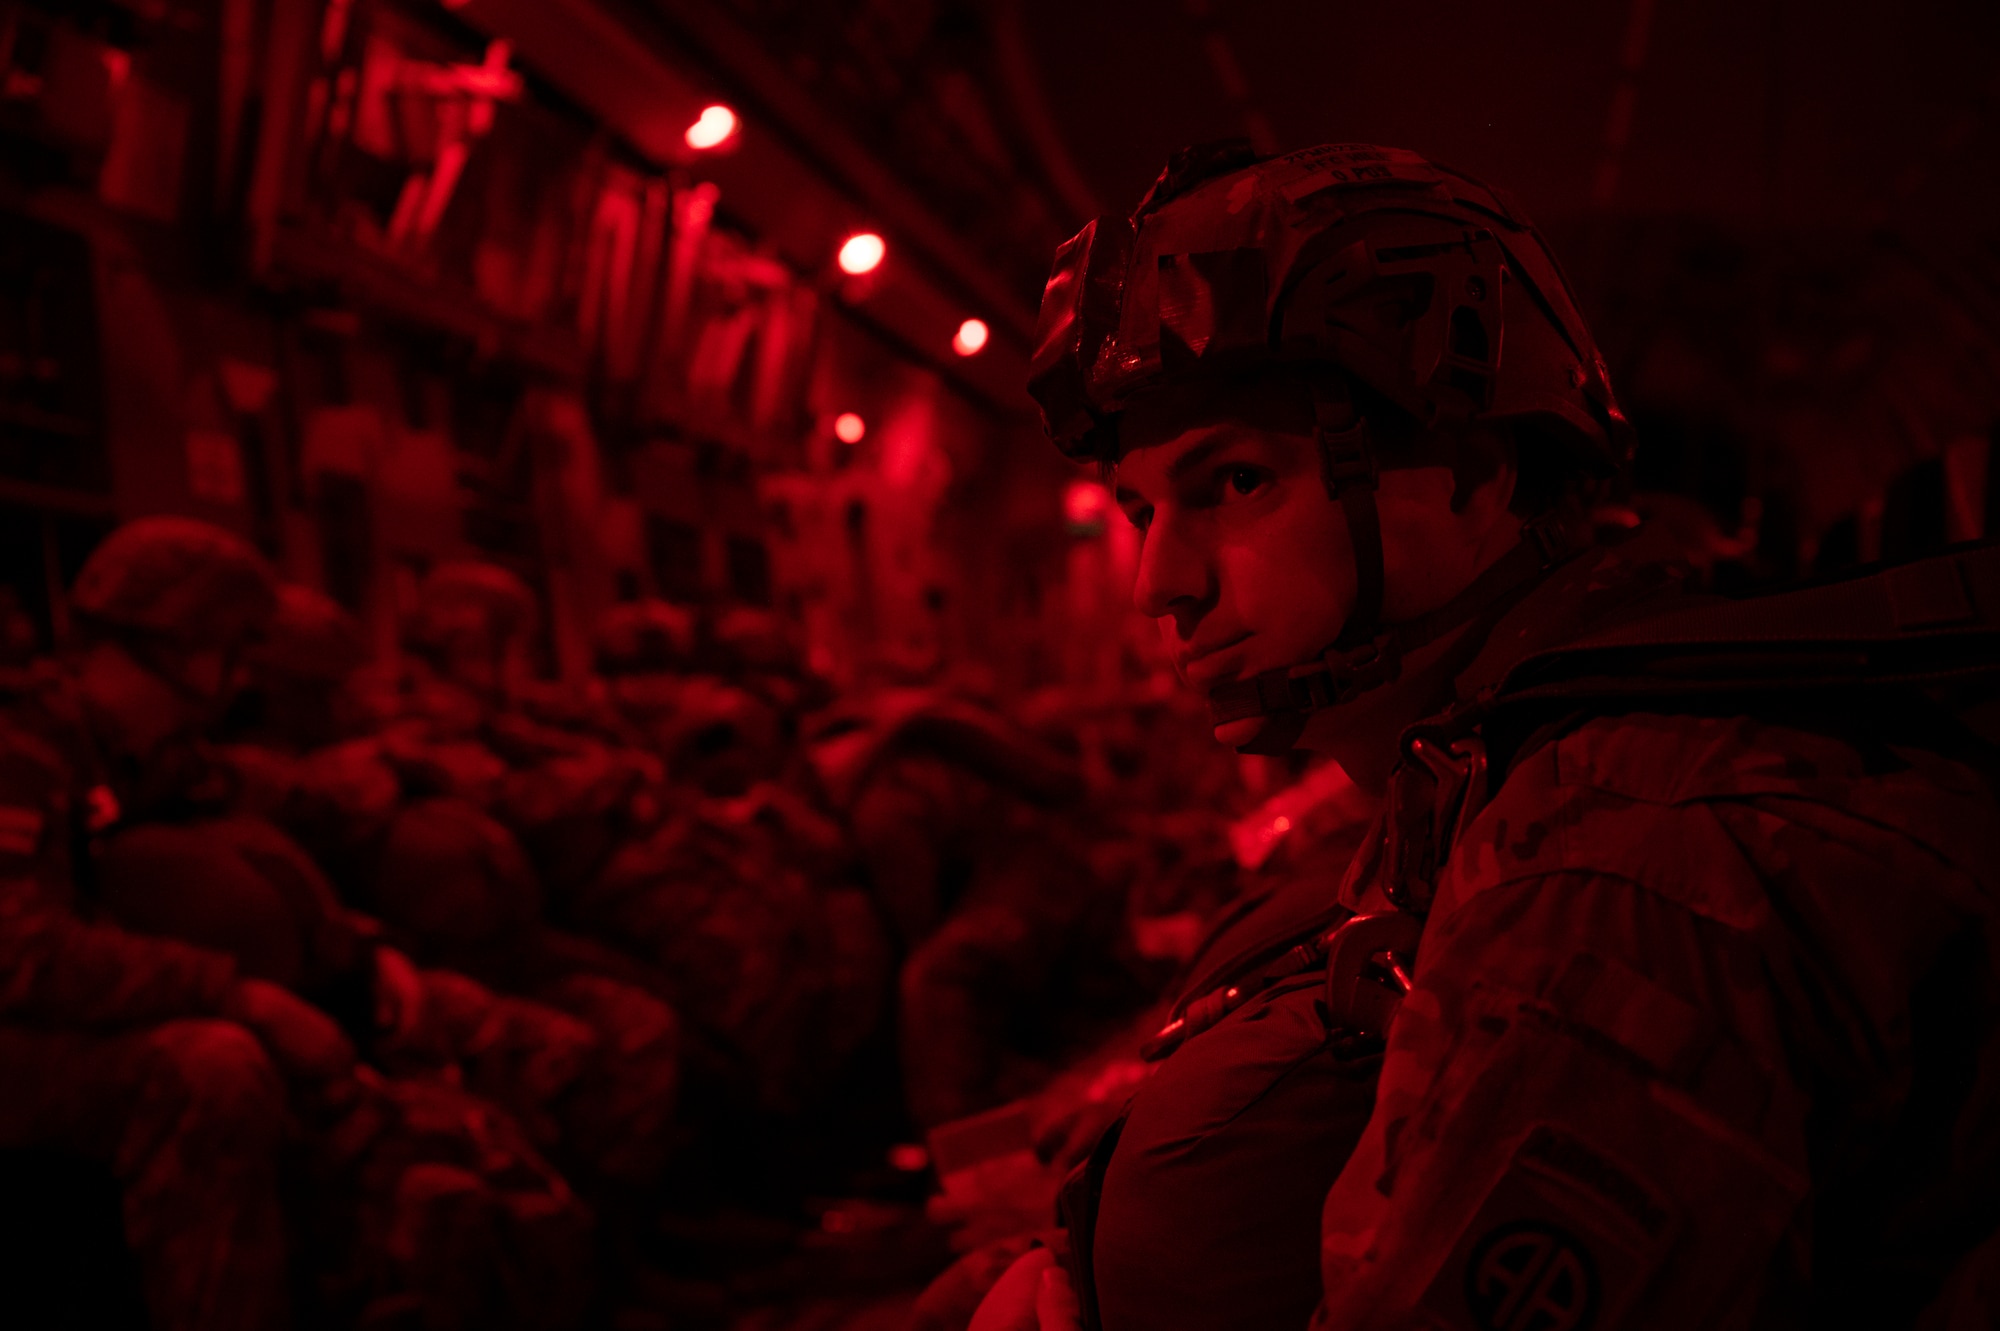 U.S. Army paratroopers assigned to the 82nd Airborne Division, Fort Bragg, North Carolina, wait for takeoff on a C-17 Globemaster III during Battalion Mass Tactical Week, or BMTW, at Pope Army Airfield, North Carolina, Feb. 3, 2022. BMTW is a joint exercise between the U.S. Air Force and      U.S. Army, which gives participants the ability to practice contingency operations in a controlled environment. (U.S. Air Force photo by Airman 1st Class Charles Casner)